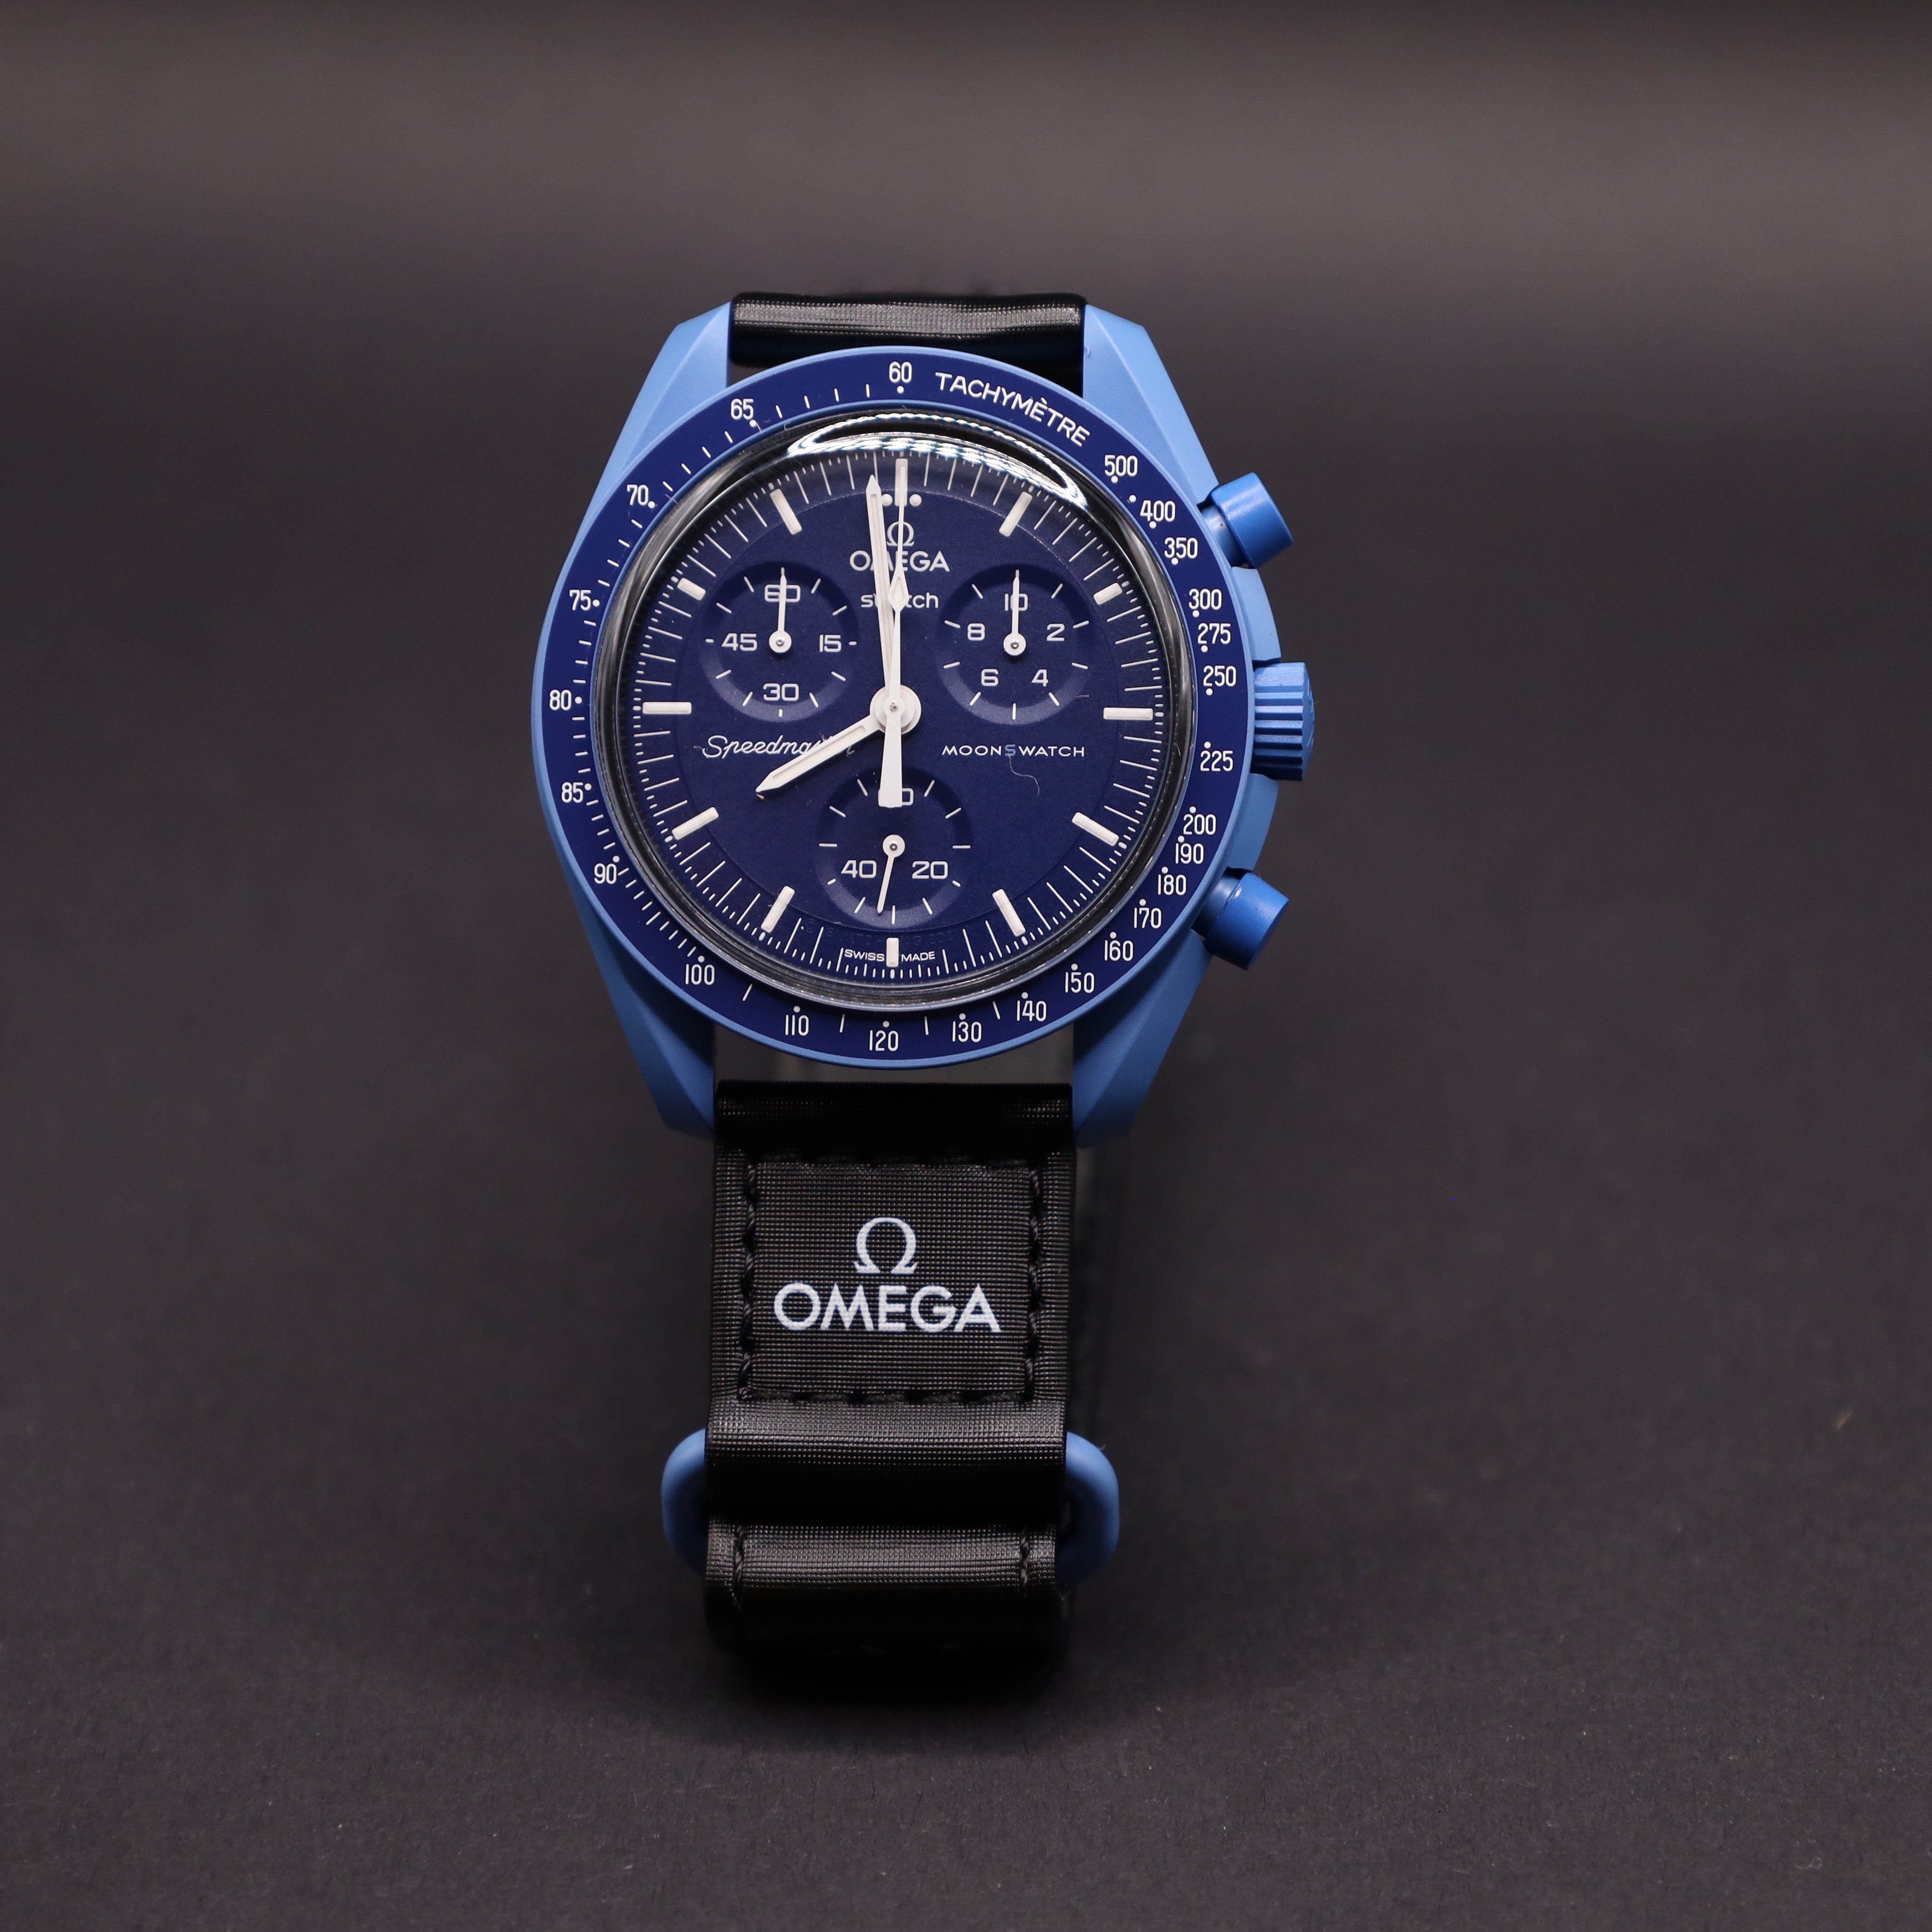 Omega Chronograph Swatch Omega Neptune to Moonswatch (1-tlg) Mission Bioceramic SO33N100